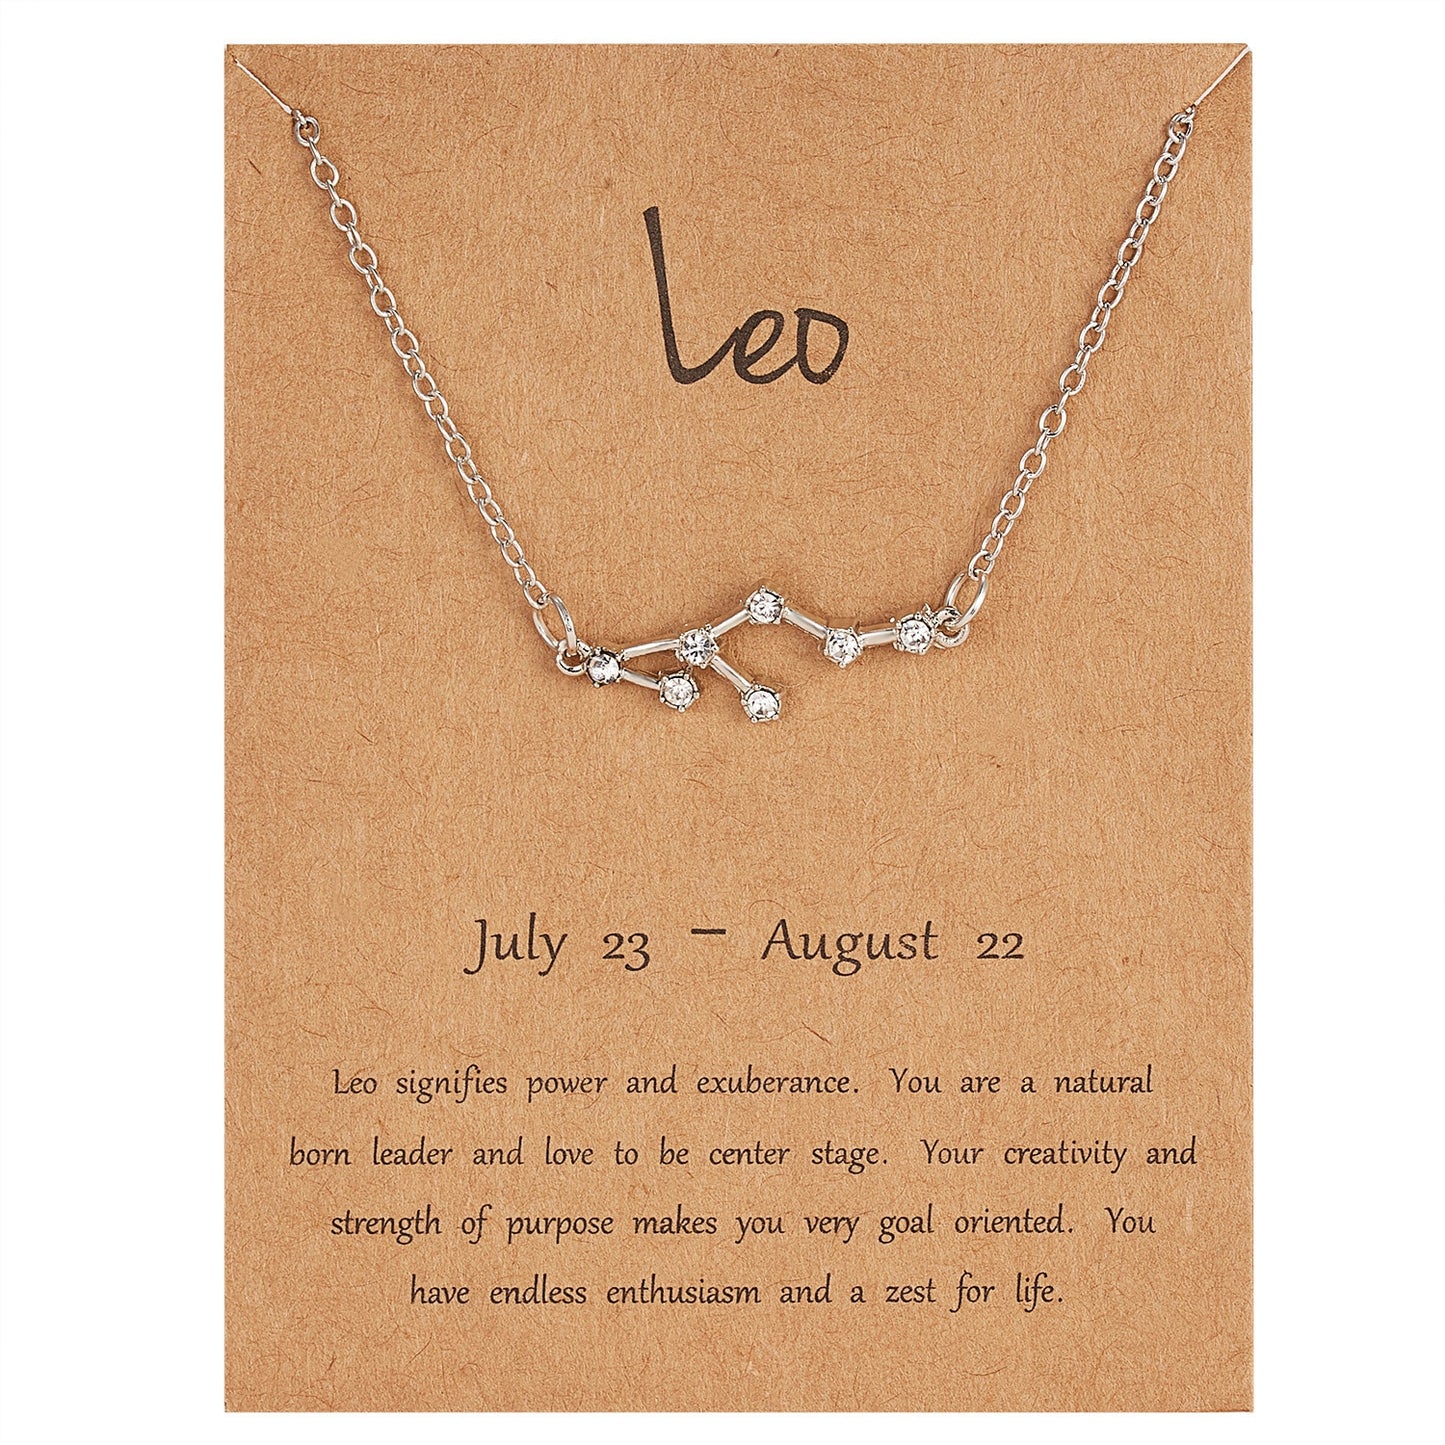 12 Constellation Pendant Necklaces Jewelry Choker Necklace Zodiac Sign Charm Necklace Birthday Gifts Aquarius Pisces Leo Virgo